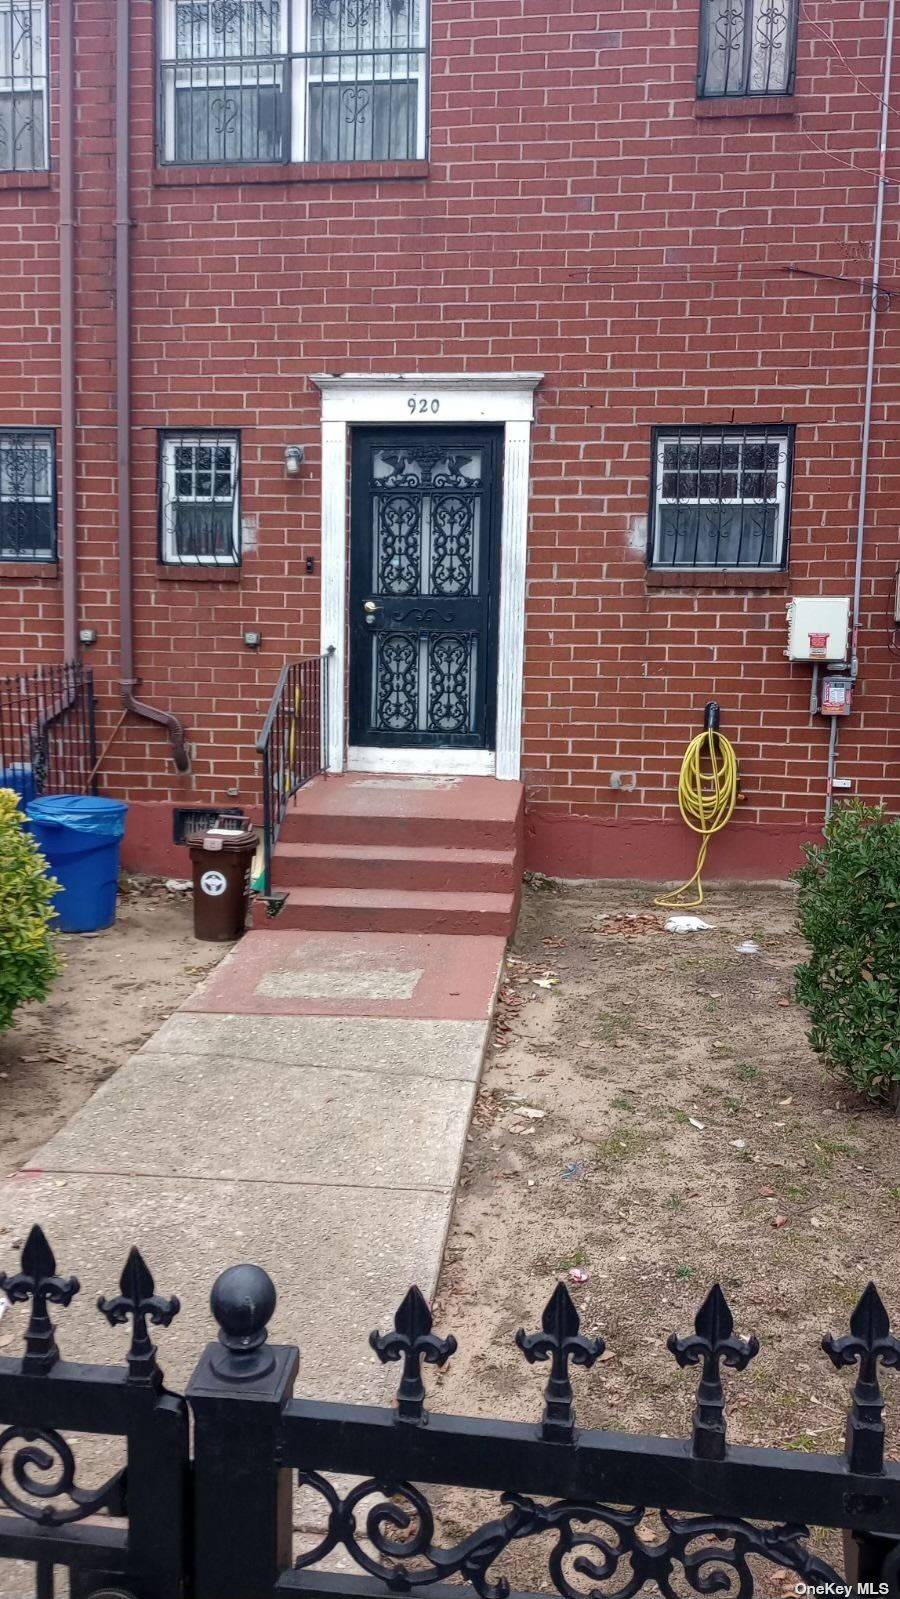 This charming 3 bedroom, 1 1 2 bath home located at 920 Rockaway Ave in Brooklyn, NY is a true gem.